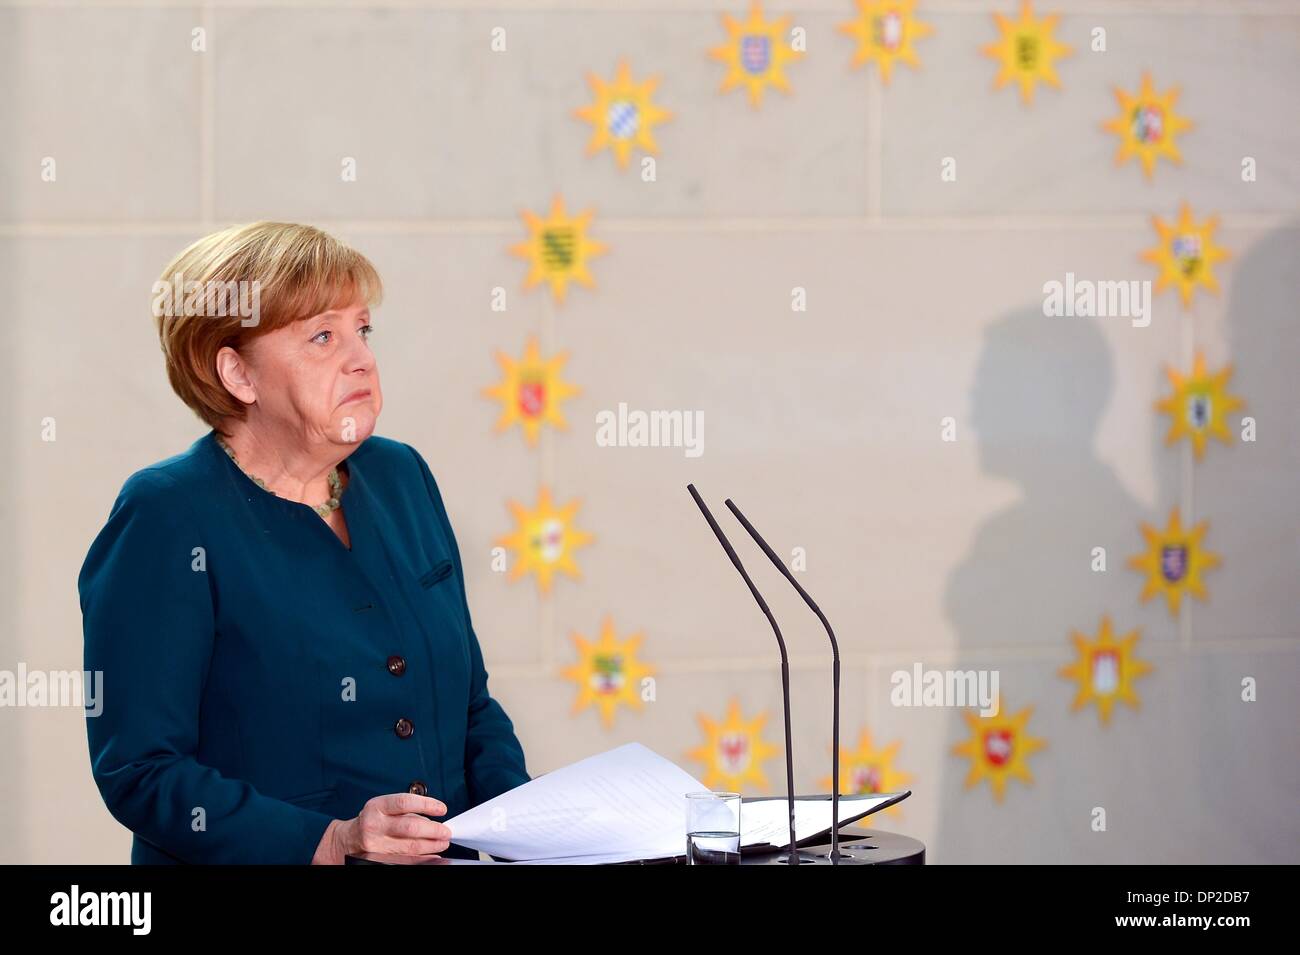 Berlin, Germany. 7th Jan, 2014. German Chancellor Angela Merkel uses crutches during the annual reception for Carolers at the chancellery in Berlin, Tuesday Jan. 7, 2014. German Chancellor Angela Merkel suffered a pelvis injury during ski holidays in the Swiss Alps and will have to cut back on her work schedule for the next three weeks. The signs show the different German cities the Carolers are coming from. Credit:  Goncalo Silva/NurPhoto/ZUMAPRESS.com/Alamy Live News Stock Photo